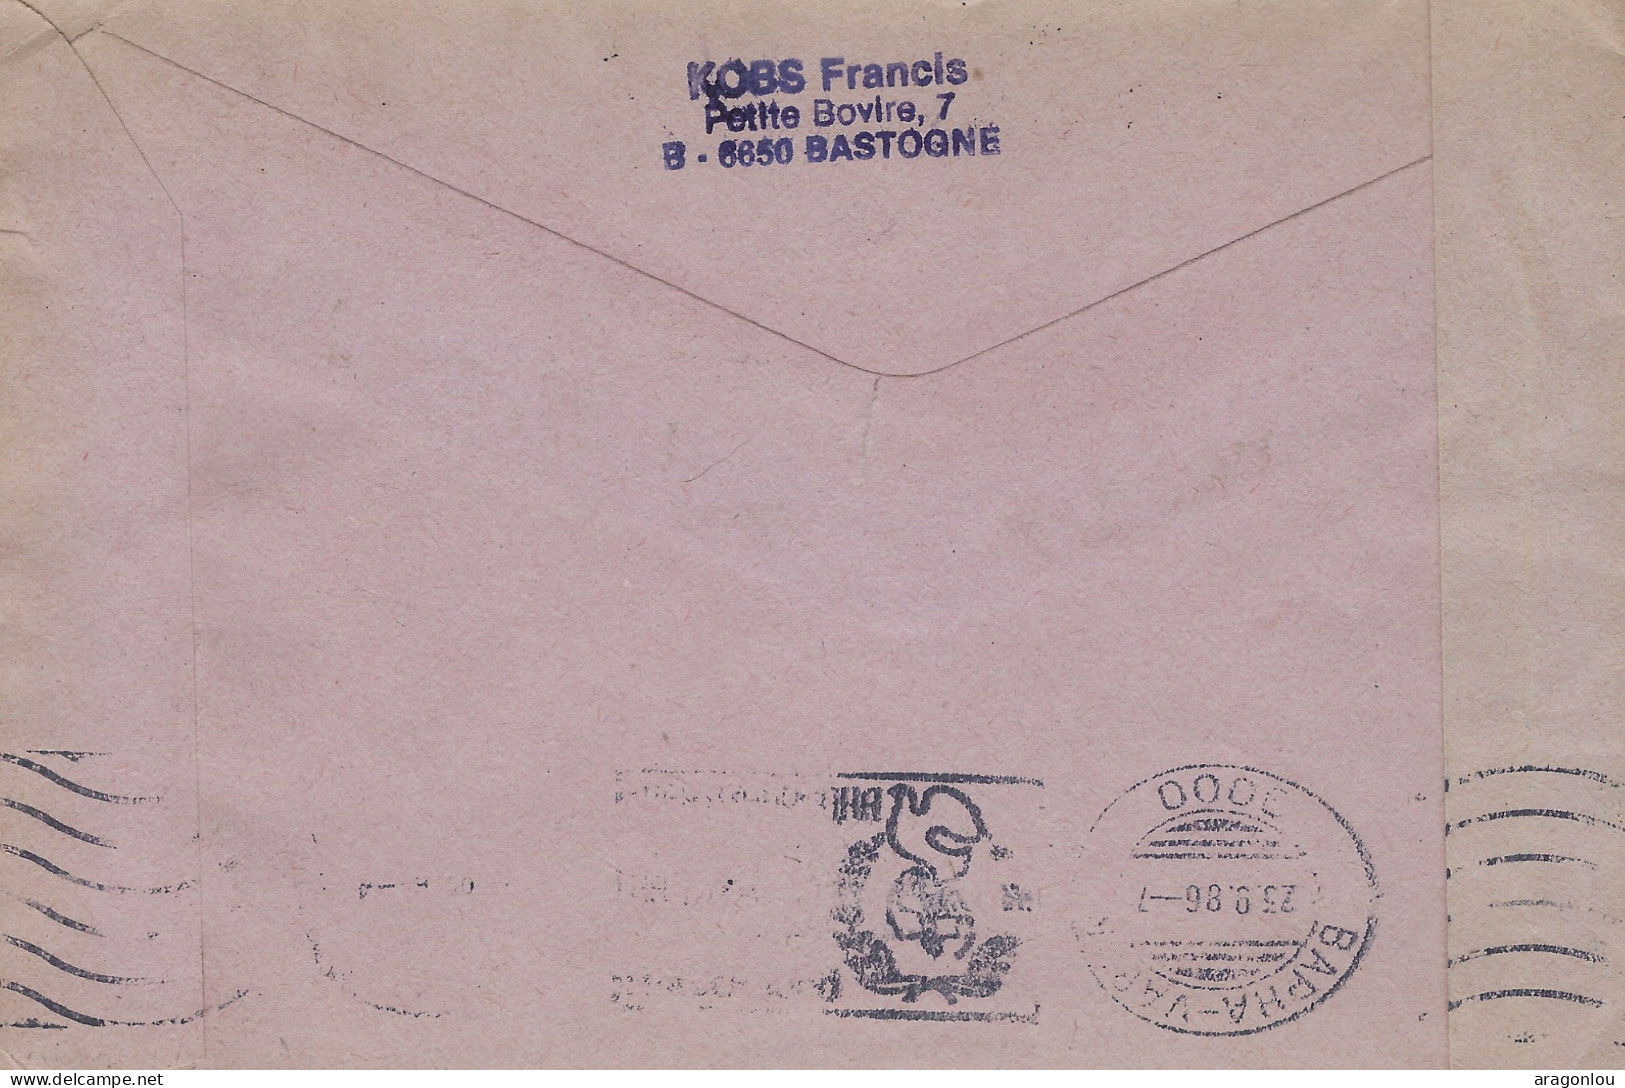 Luxembourg - Luxemburg - Lettre   TAXES   1986 - Postage Due